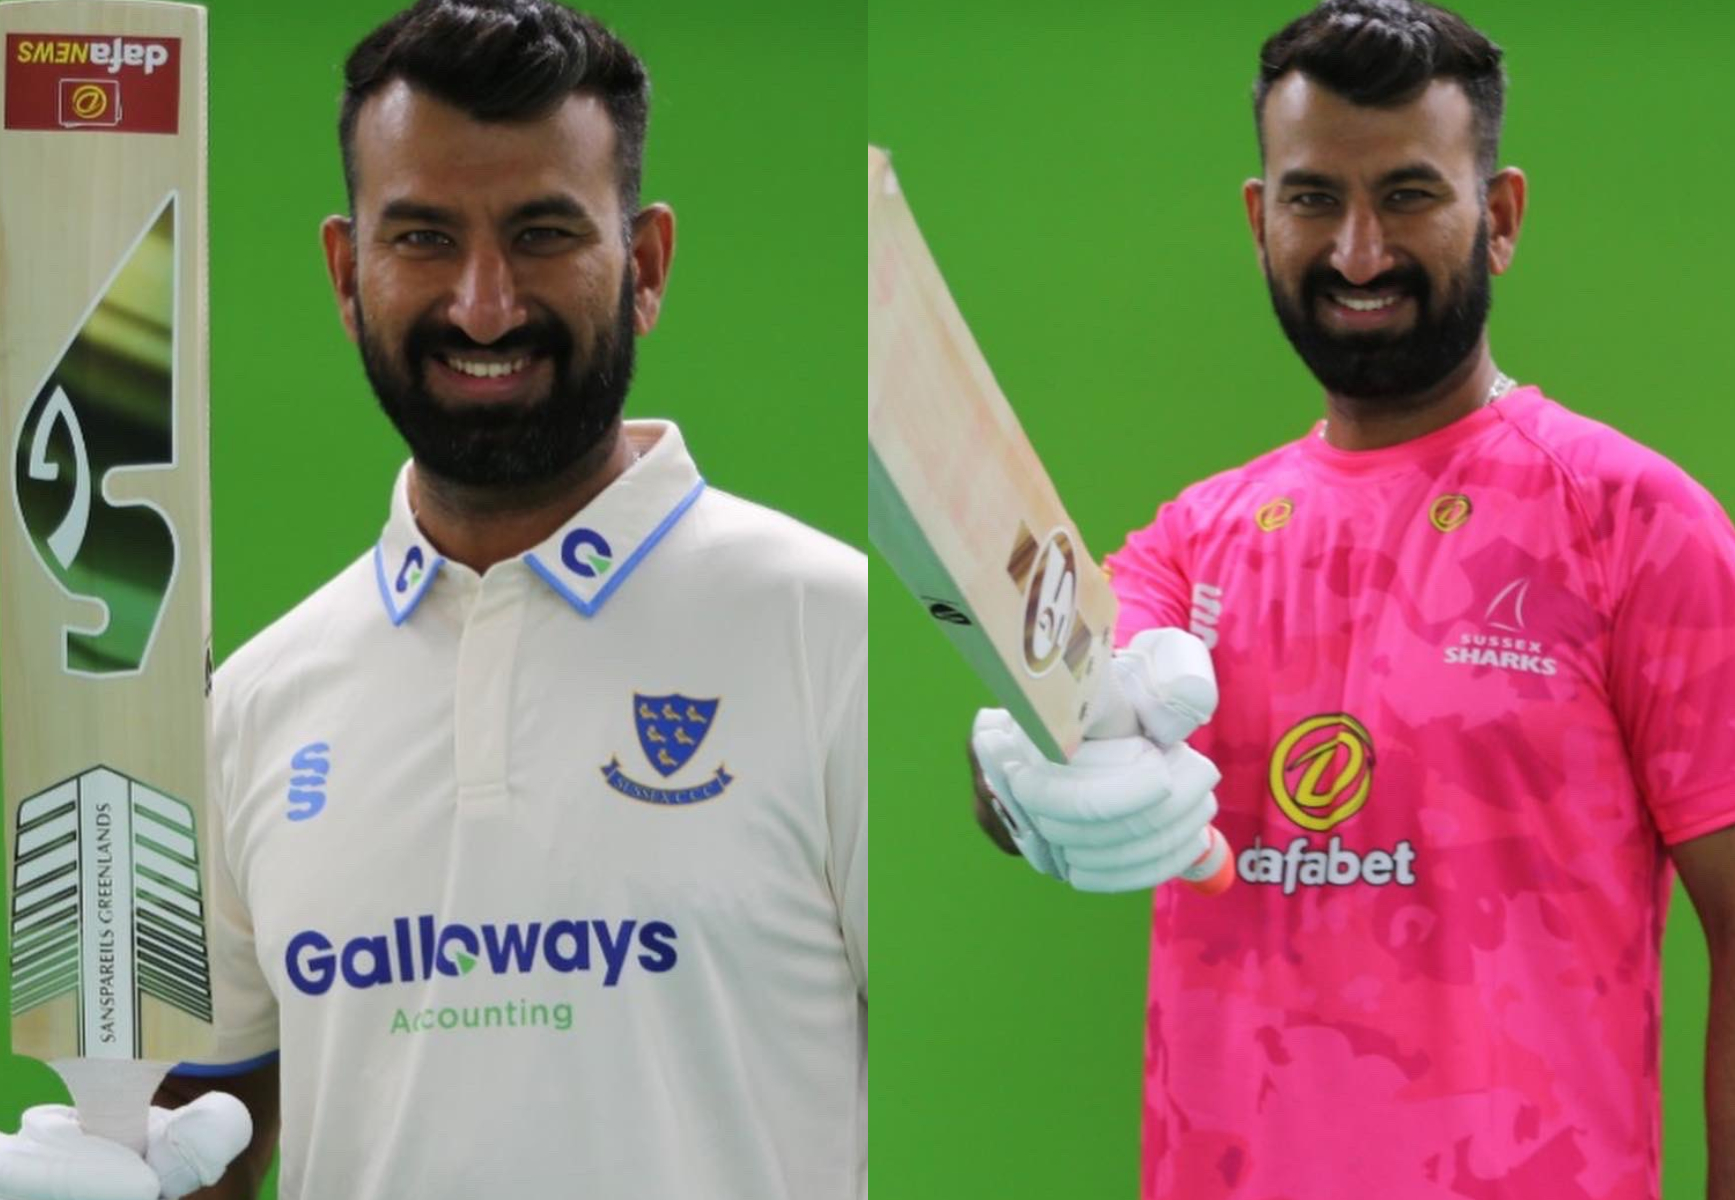 Pujara will play for Sussex in both county championship and Royal London one-day cup | Twitter